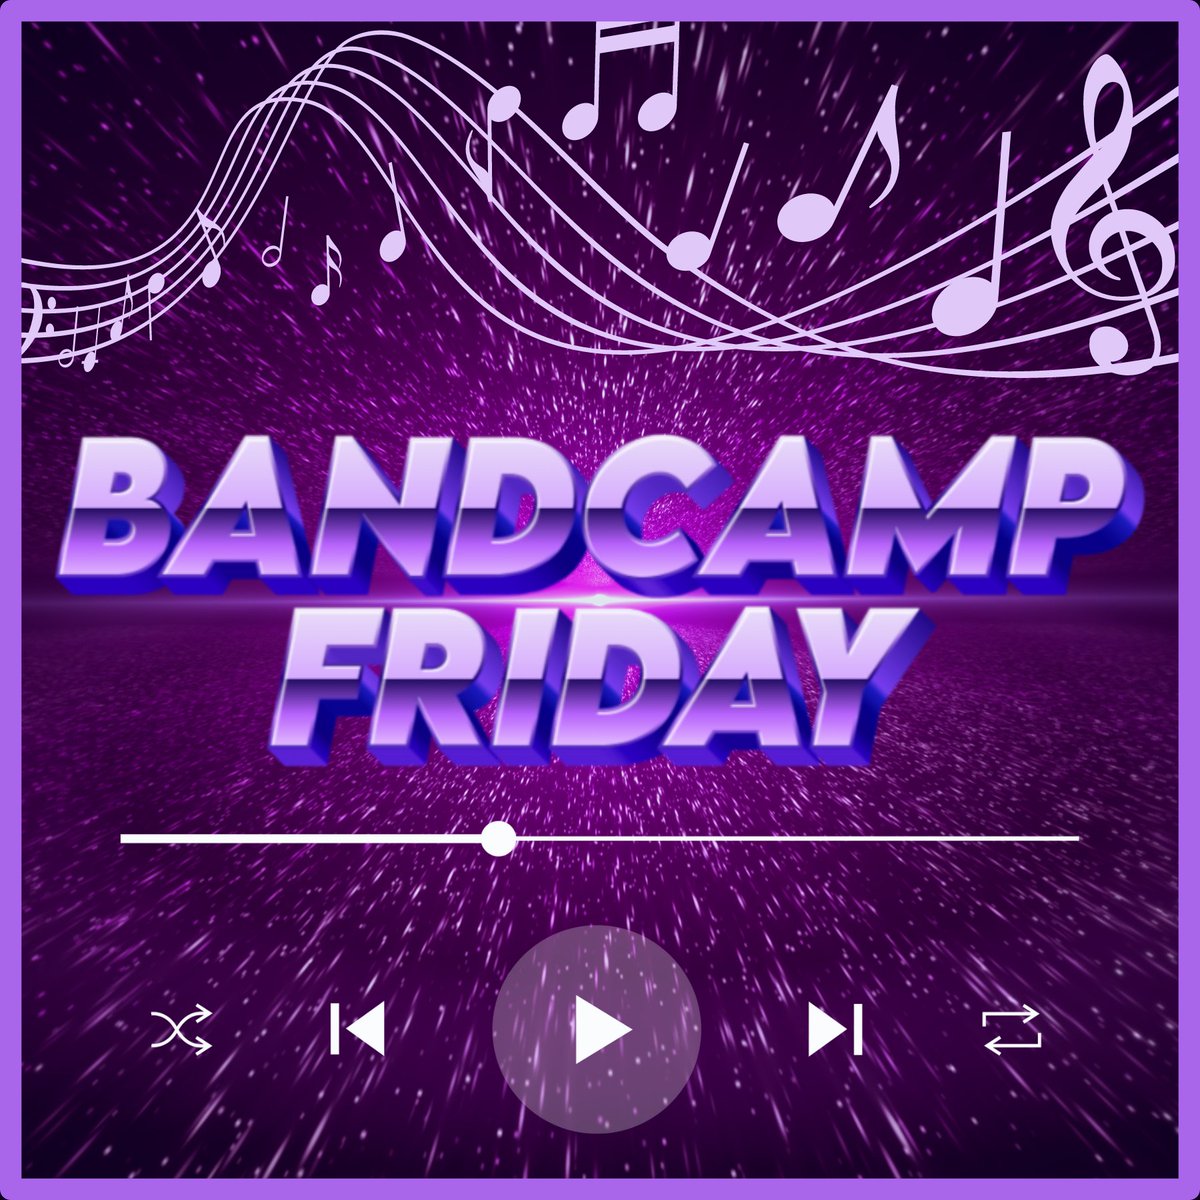 It's Bandcamp Friday! Post those links and support some artists today 💪 #synthfam #synthwave #retrowave #electronica #electronicmusic #newmusic #bandcamp #bandcampfriday #independentartist